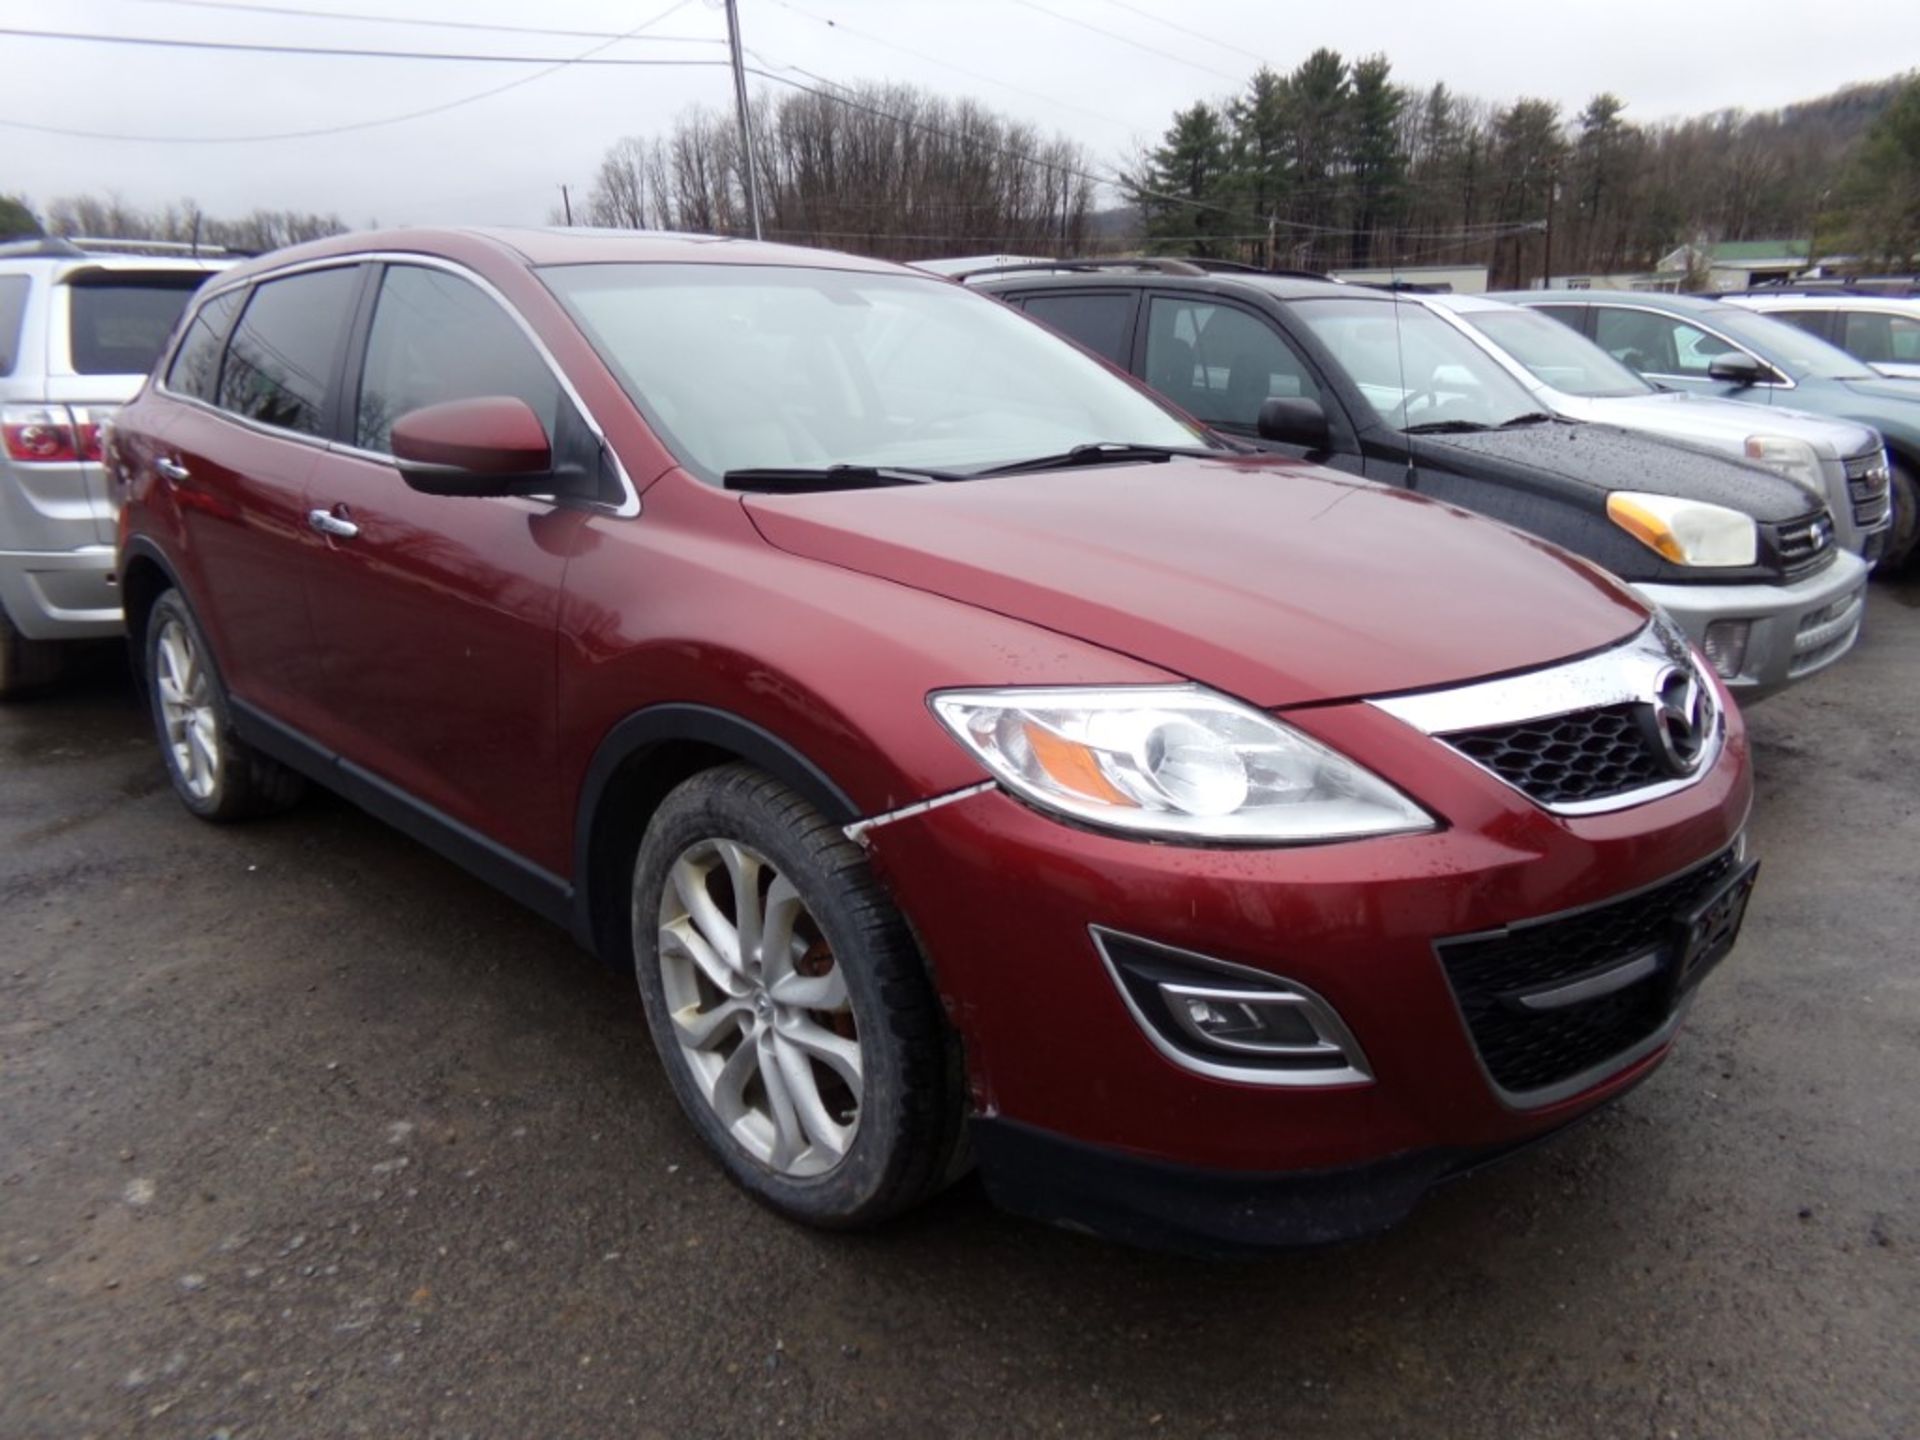 2011 Mazda CX9, AWD, Auto, Maroon, Heated Leather Seats, Sunroof, Navigation, Has New Tires, - Image 4 of 8